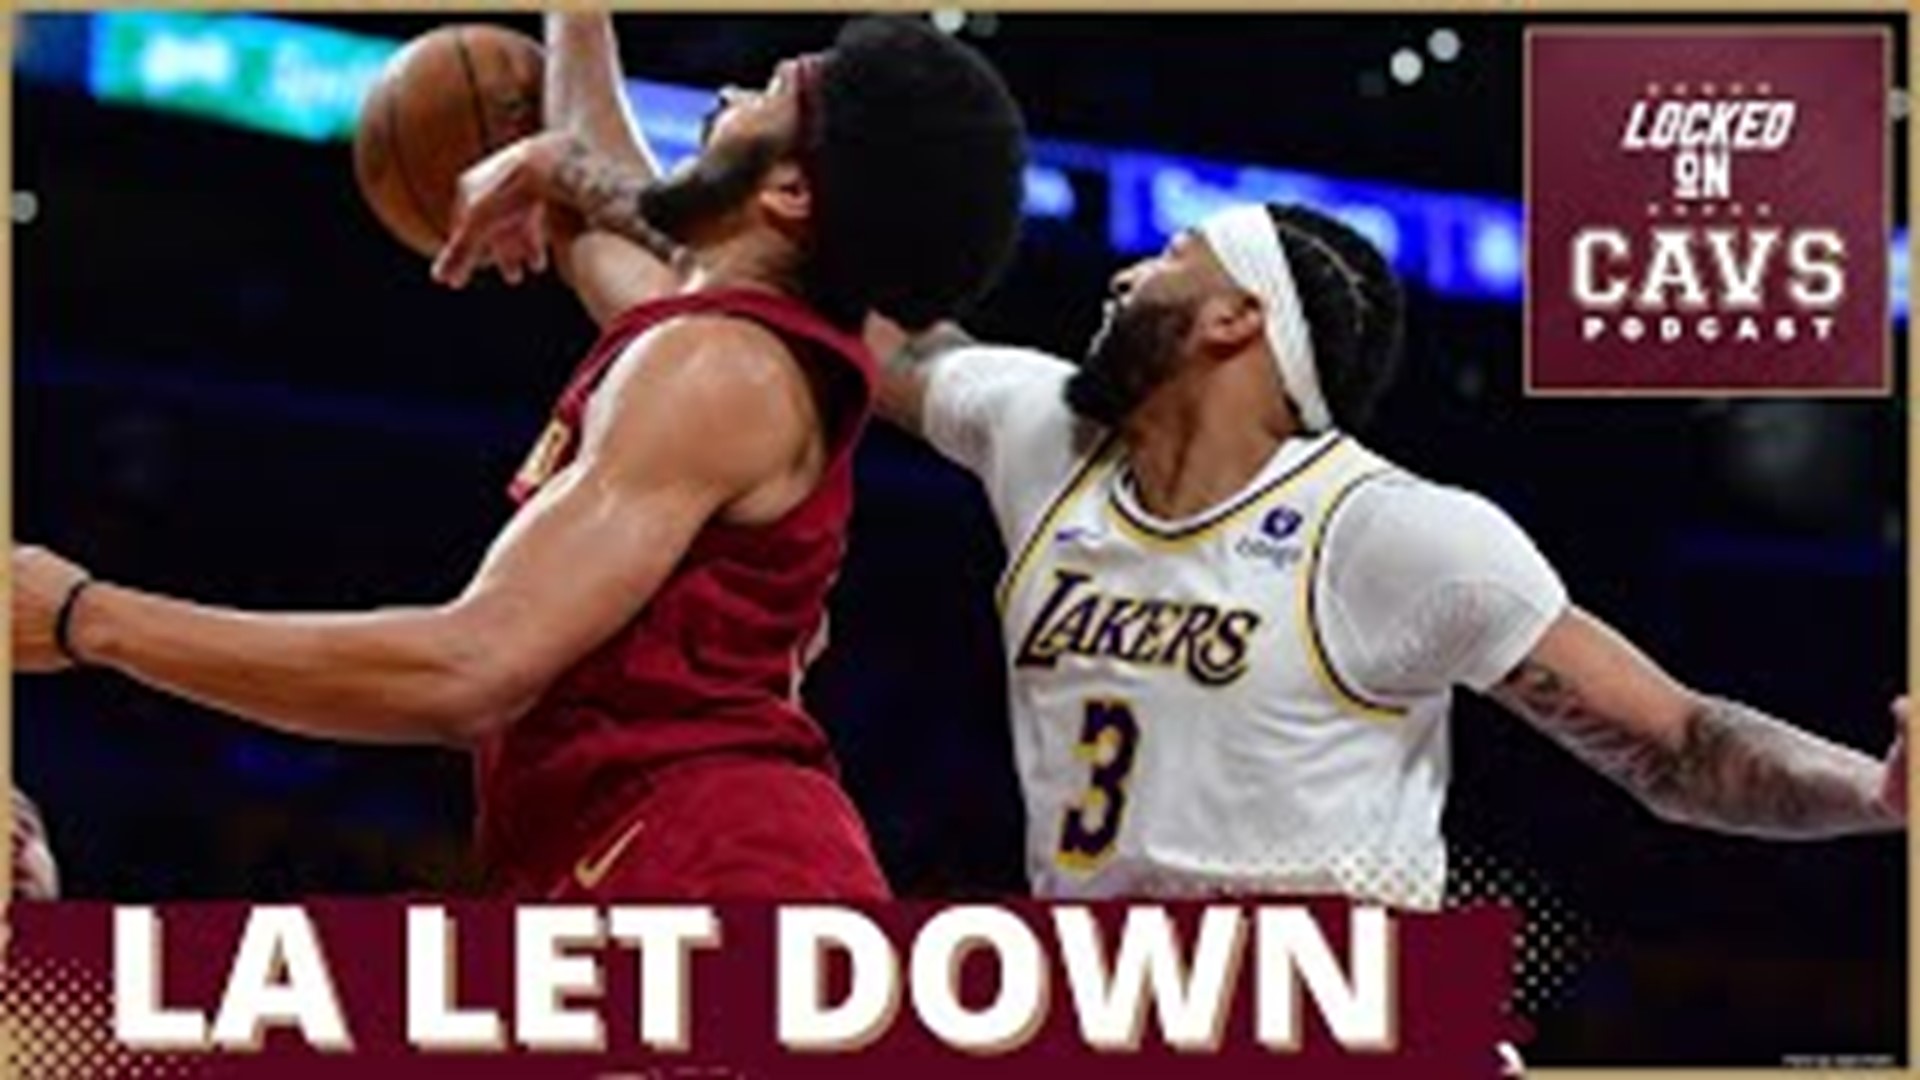 On a new episode of Locked on Cavs hosts Chris Manning and Evan Dammarell look at the Cavs' loss to the Lakers, Donovan Mitchell still not looking right.